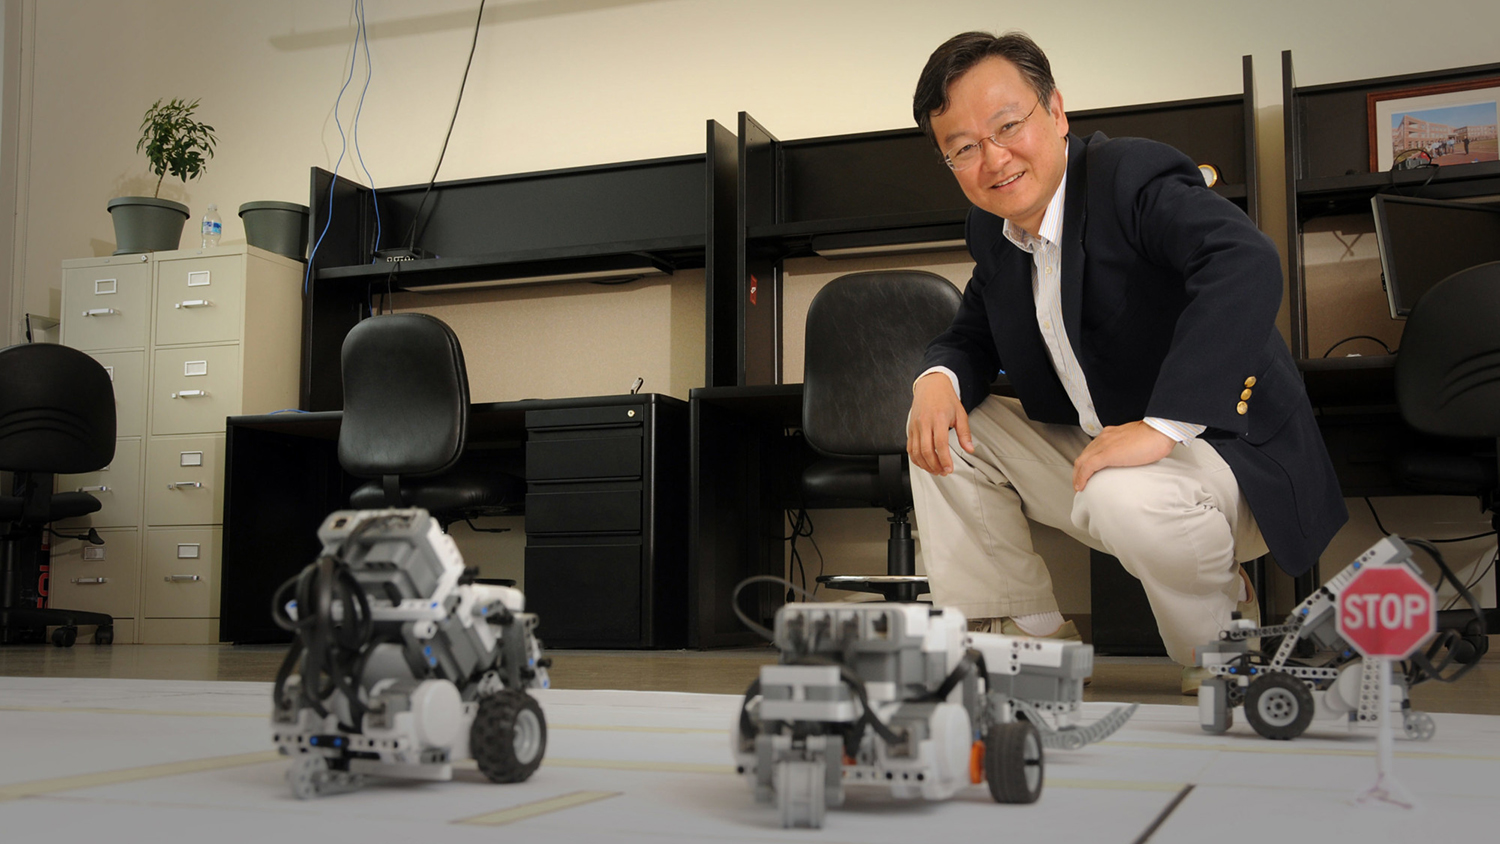 Dr. Chow poses next to devices in lab.